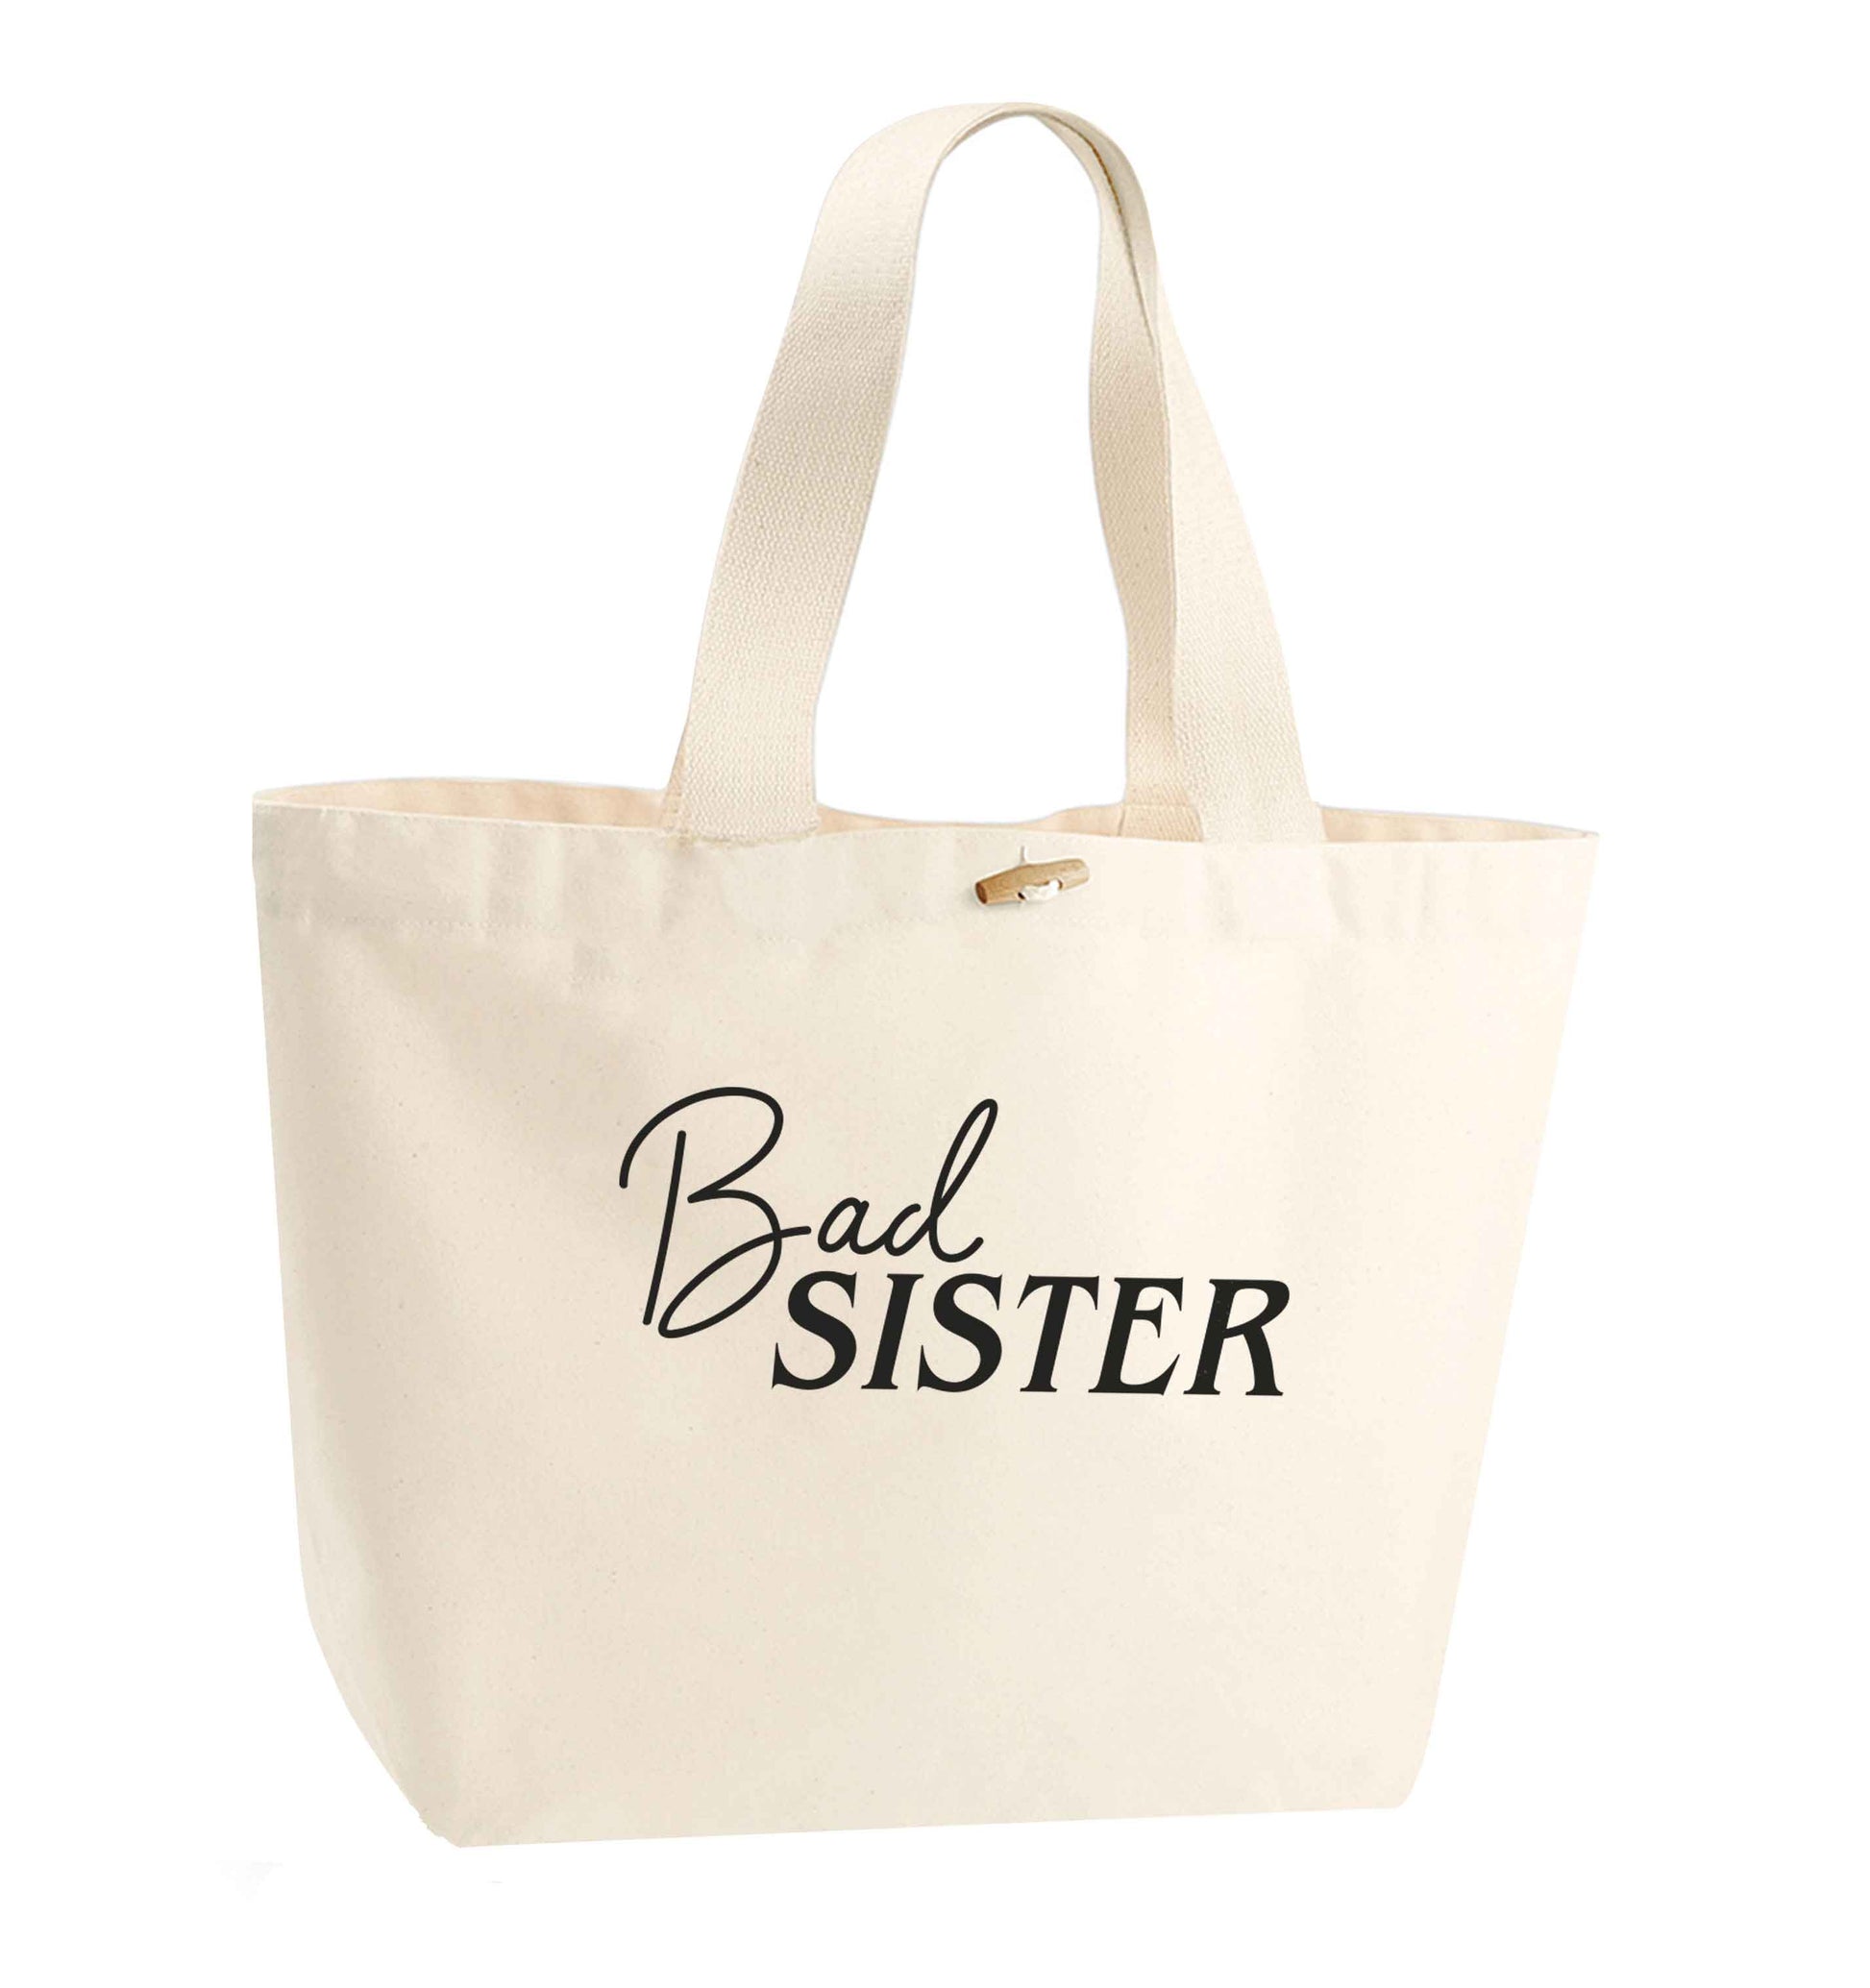 Bad sister organic cotton premium tote bag with wooden toggle in natural